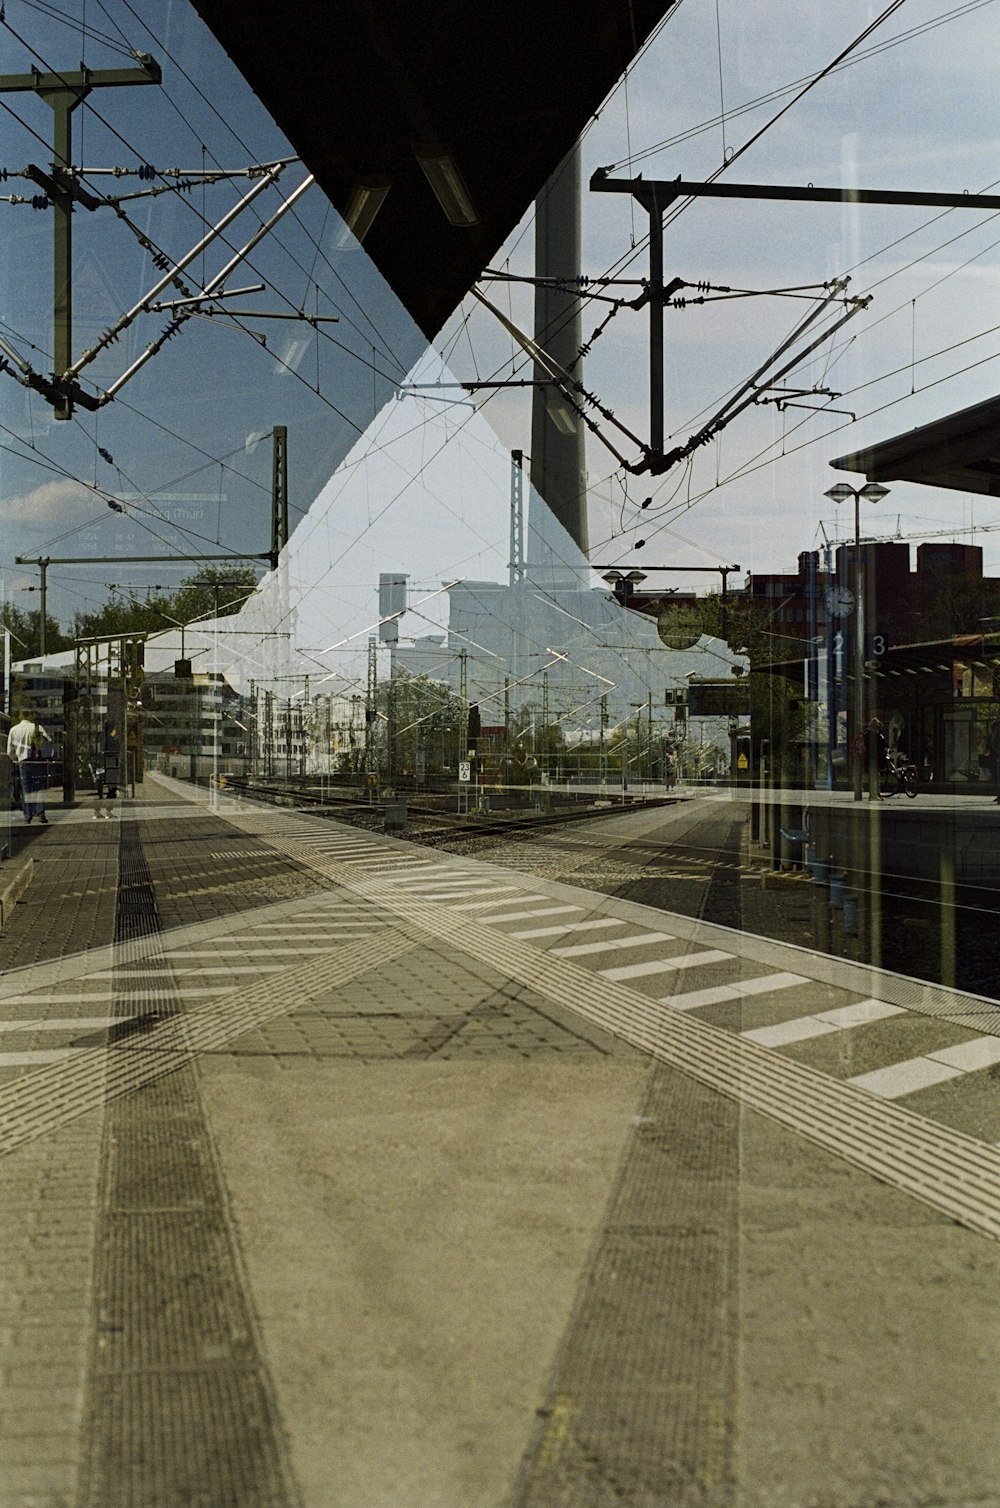 a view of a train station through a window